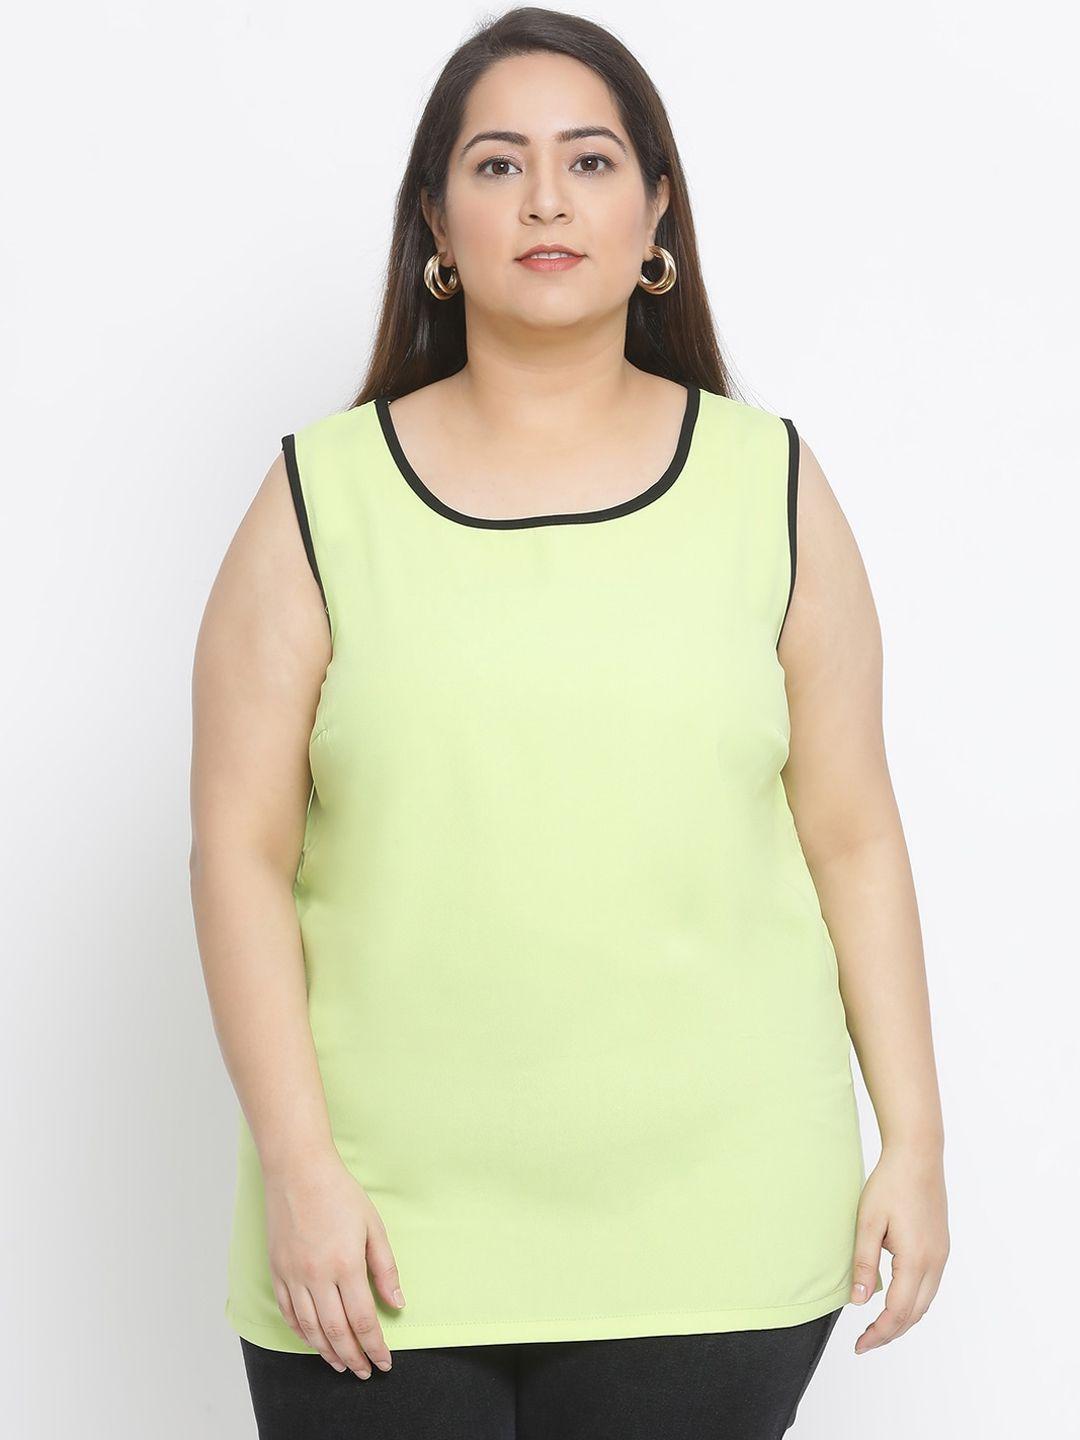 oxolloxo-women-green-solid-styled-back-top